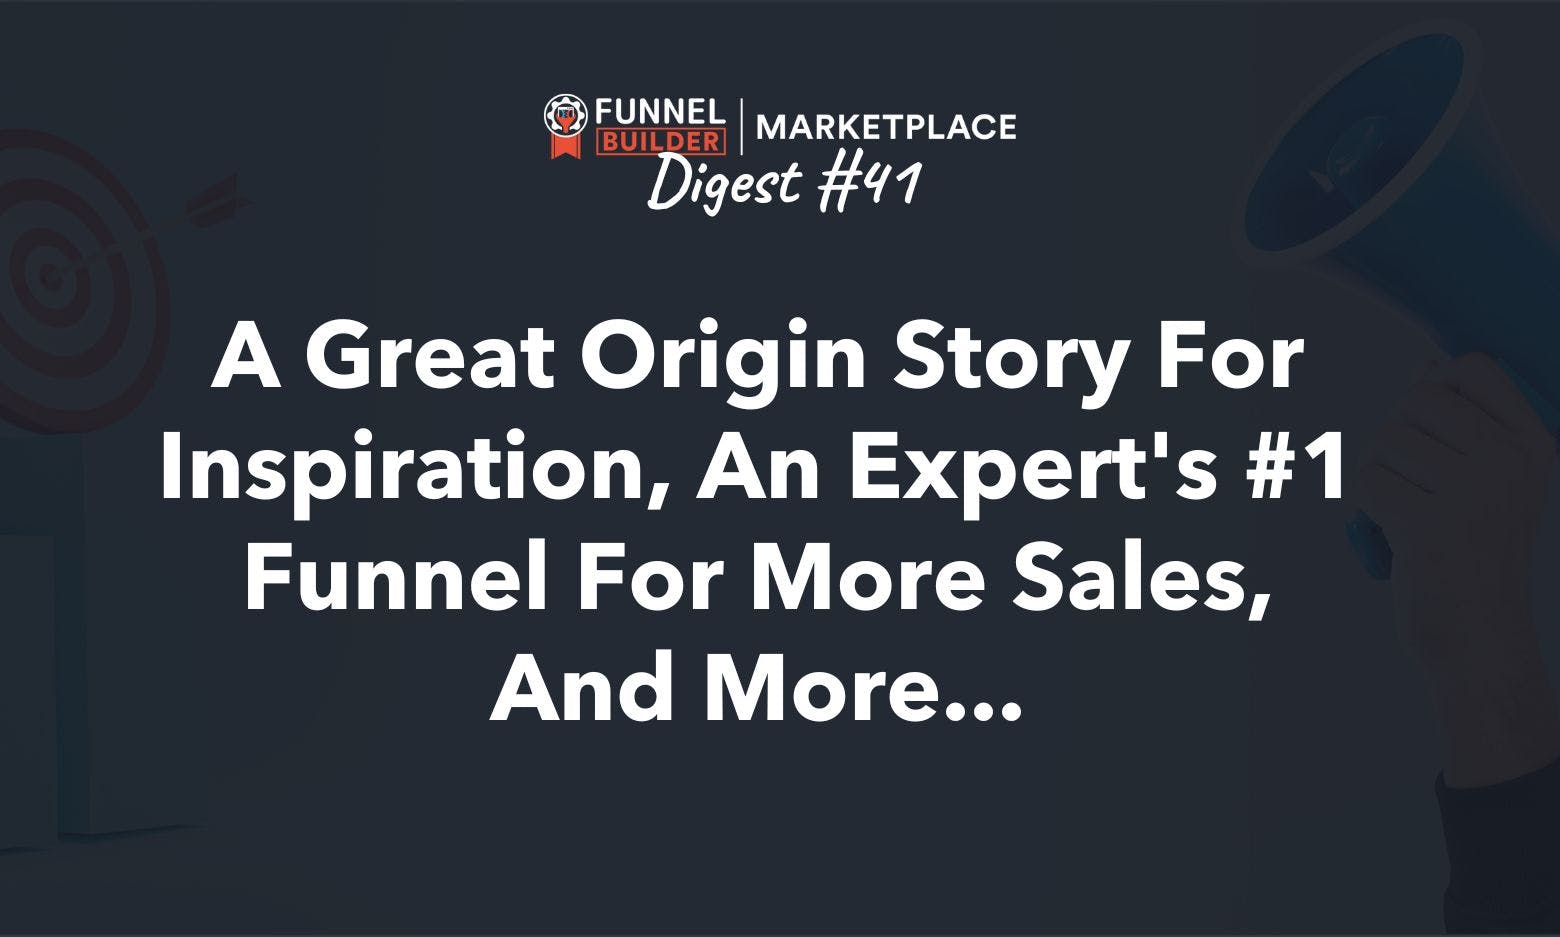 FBM Digest #41: A great origin story for inspiration, an expert's #1 funnel for more sales, and more...